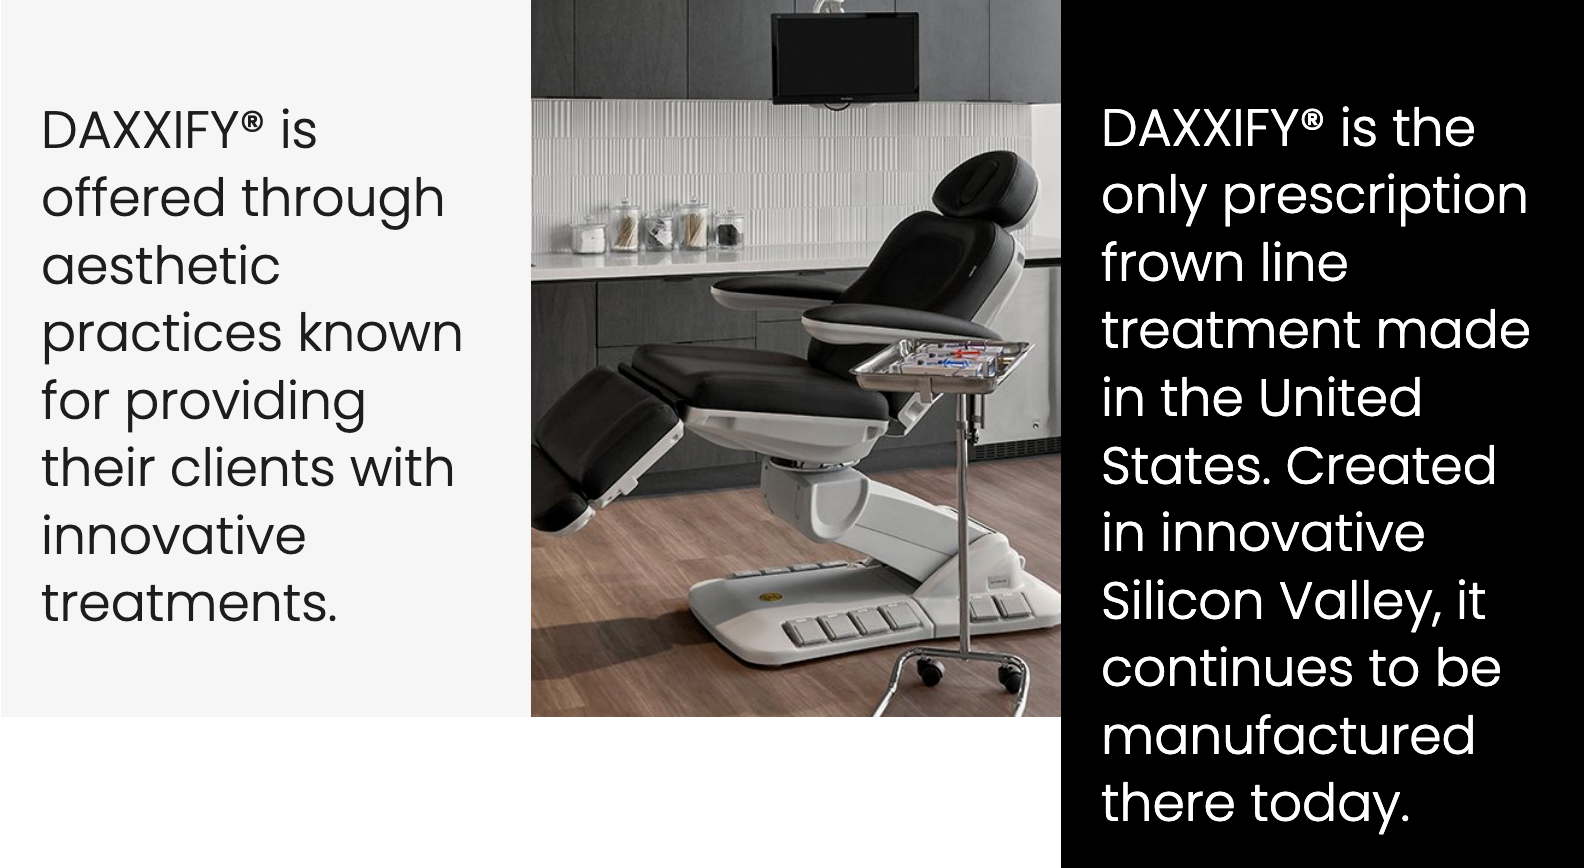 Have you heard about Daxxify yet? Discover how Daxxify can revolutionize your skin care and rejuvenate your skin.